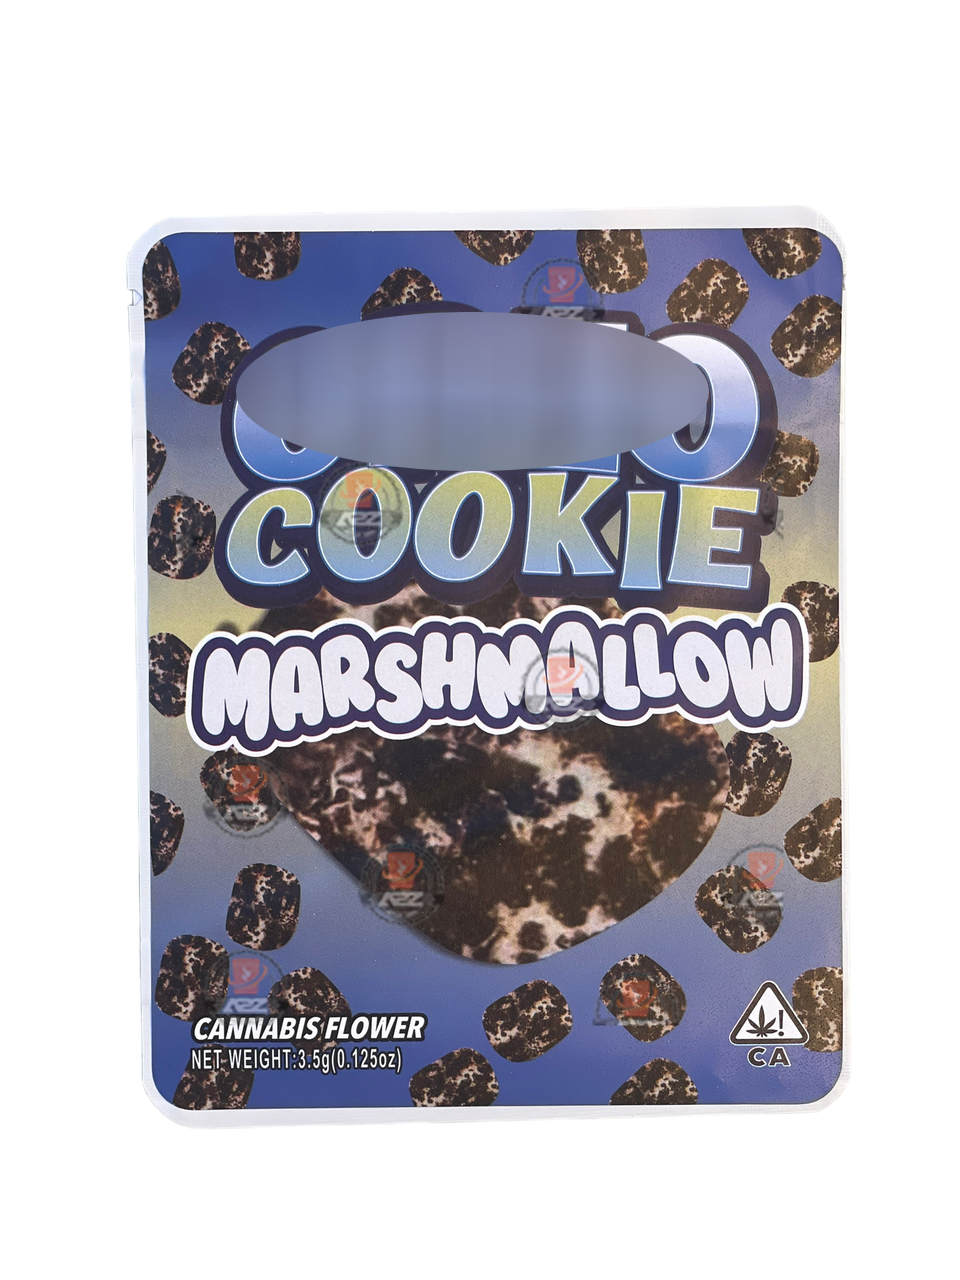 Sprinklez Cookie Marshmallow Mylar Bags 3.5g Sticker base Bag -With stickers and labels